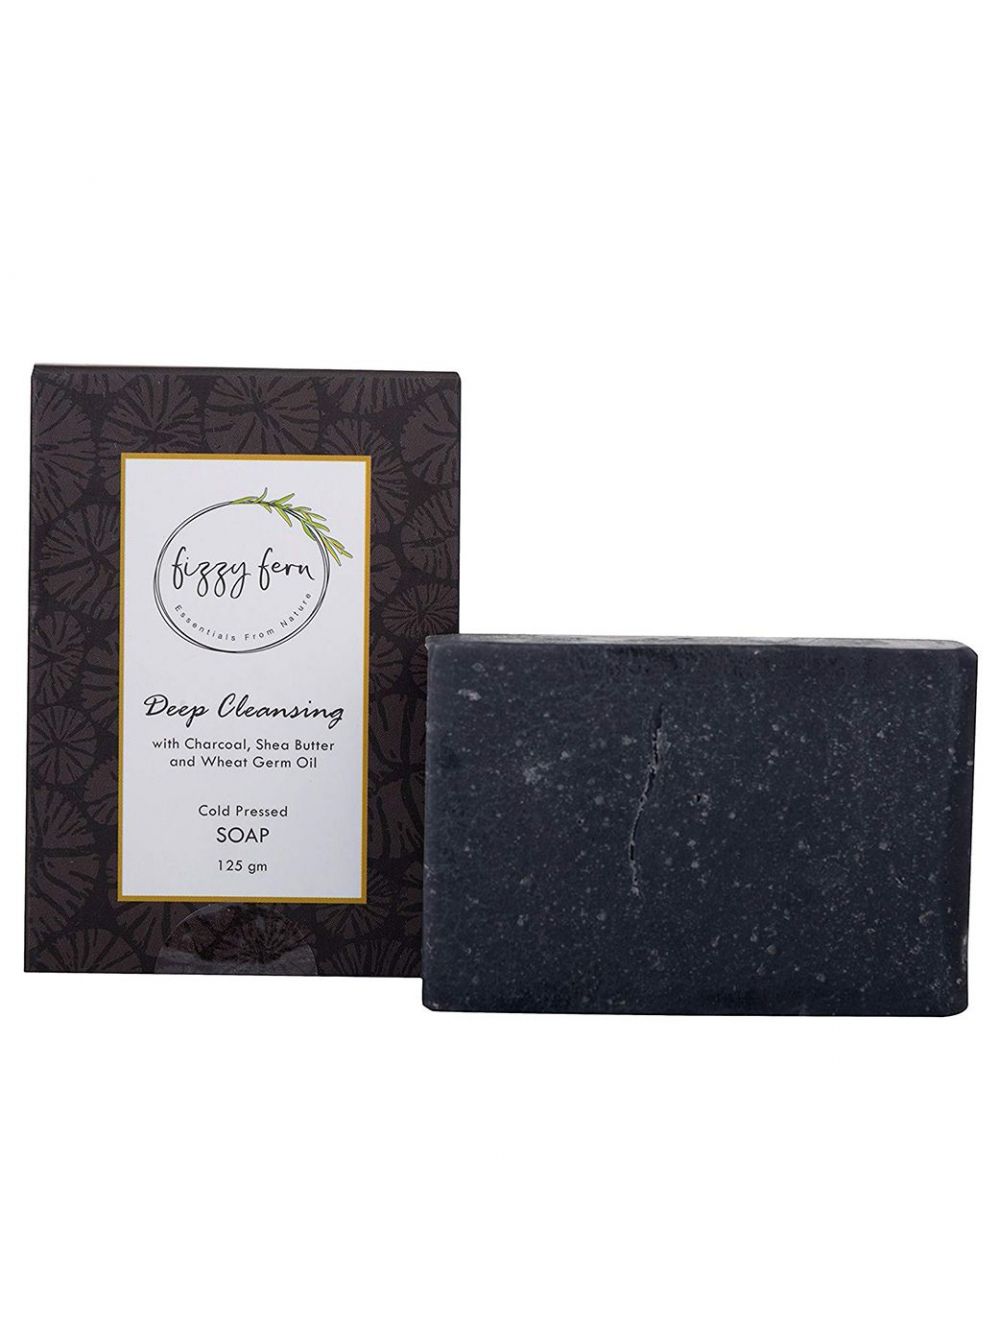 Fizzy Fern Deep Cleansing with Charcoal, Shea Butter & Wheat Germ Oil Cold Pressed Soap (125gm) - Niram